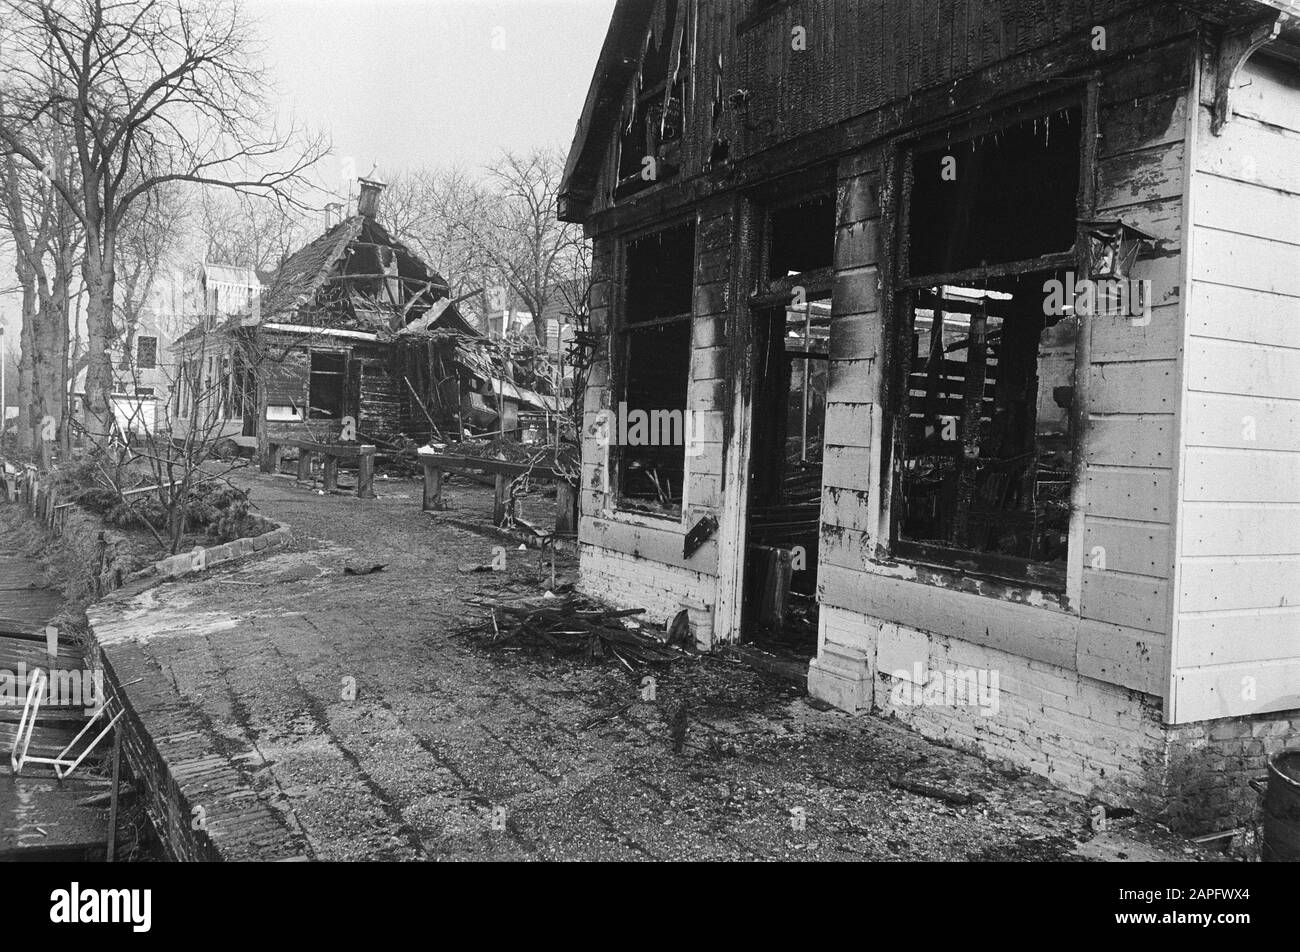 Cafe-restaurant Neeltje Pater in Broek in Waterland burned down, large part  was historical monument Date: 23 February 1981 Location: Broek in Waterland  Keywords: fires, cafes, restaurants Stock Photo - Alamy